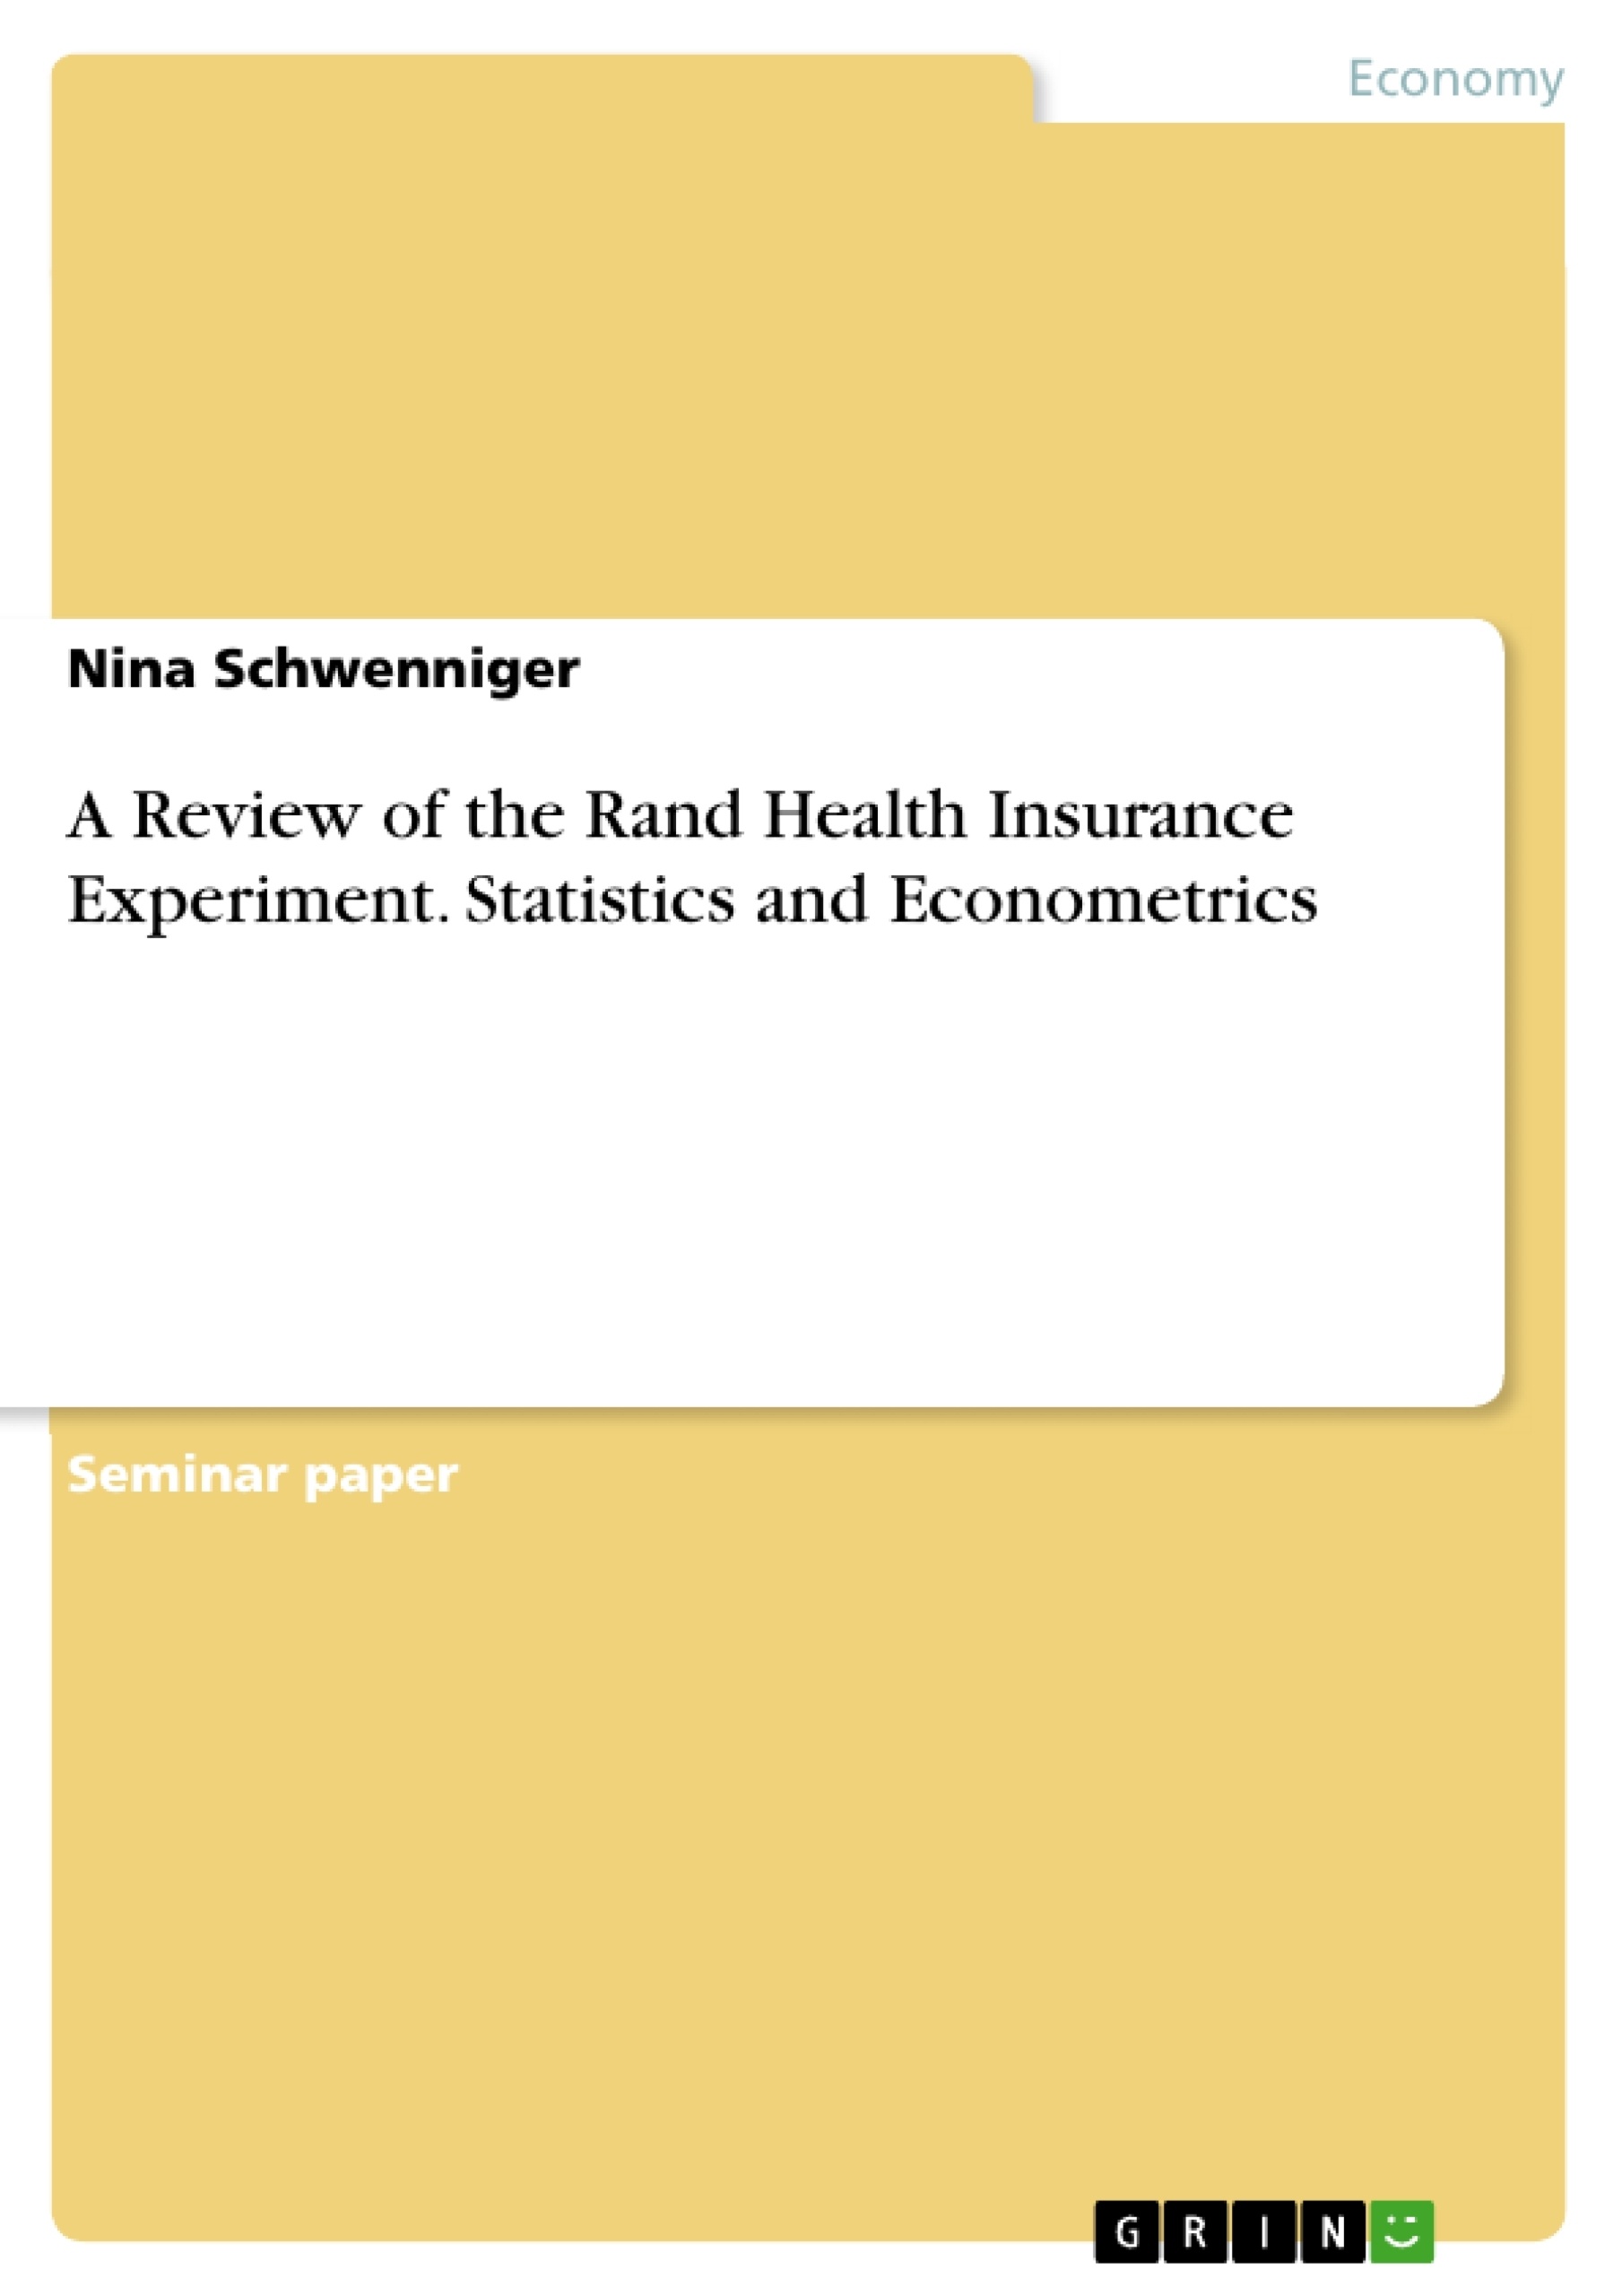 Titre: A Review of the Rand Health Insurance Experiment. Statistics and Econometrics